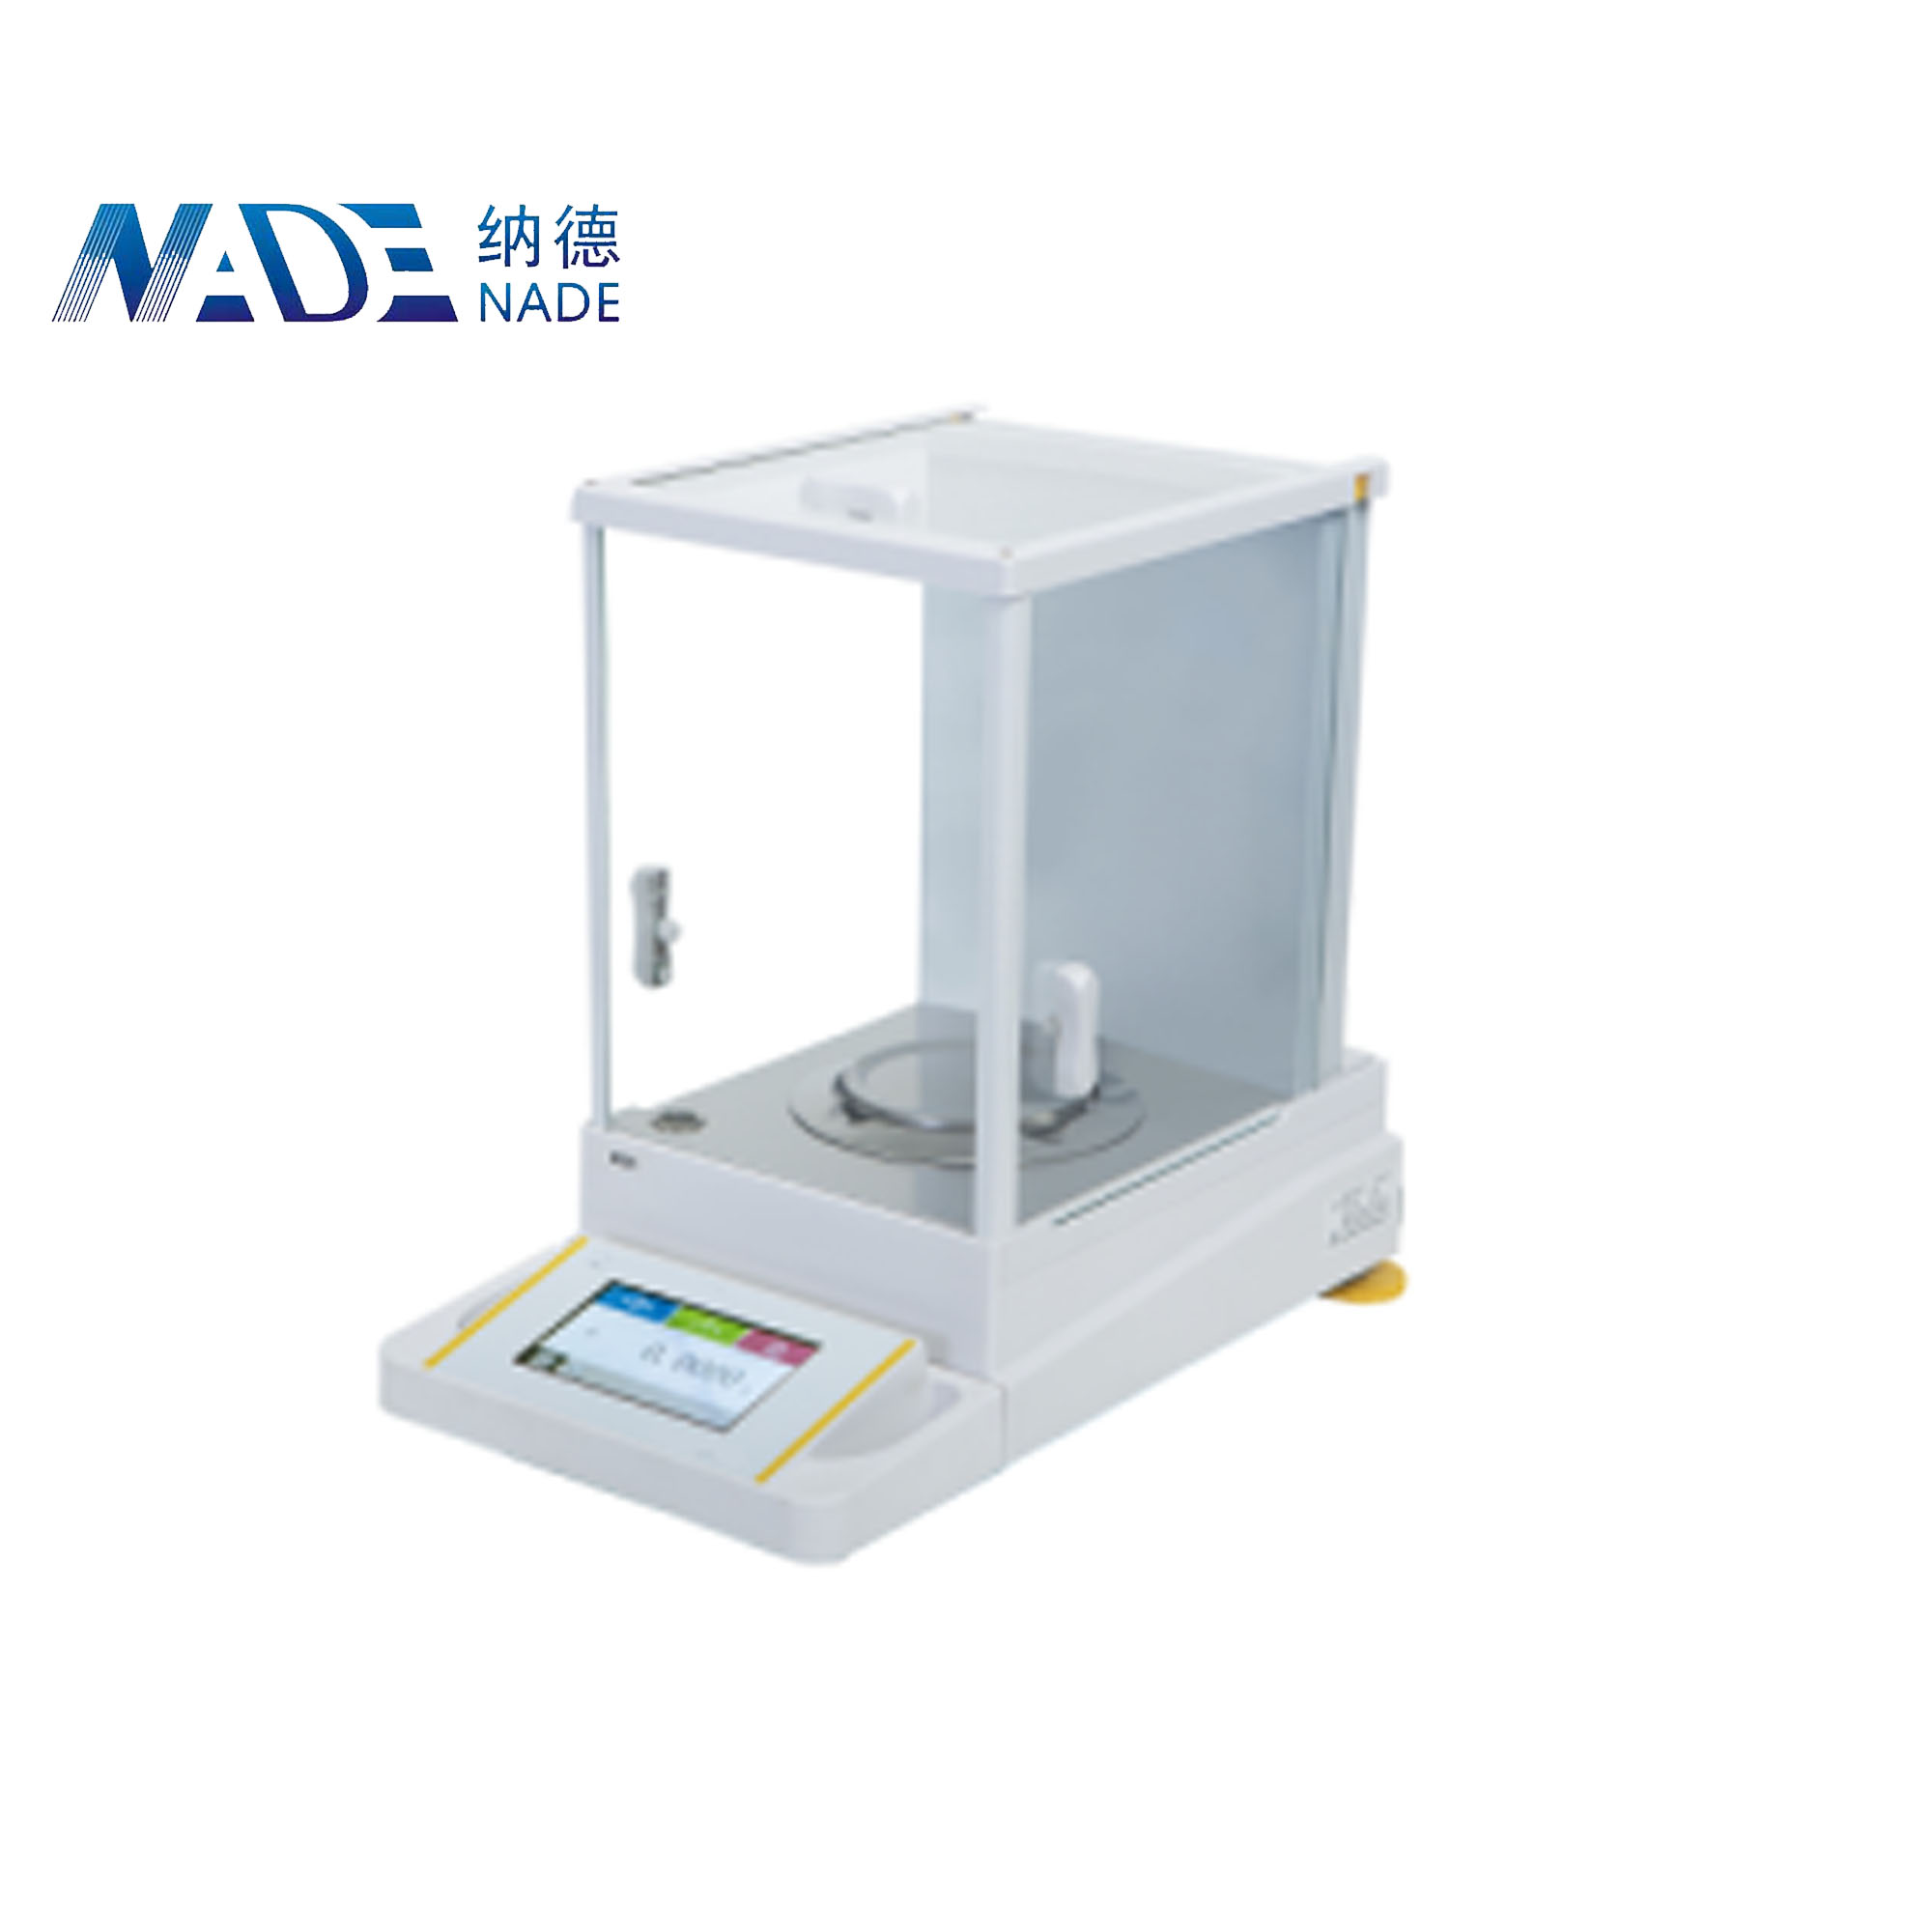 Nade AE 523C 520g/0.001g Touch Color Screen Electronic Analytic Balance Internal Calibration